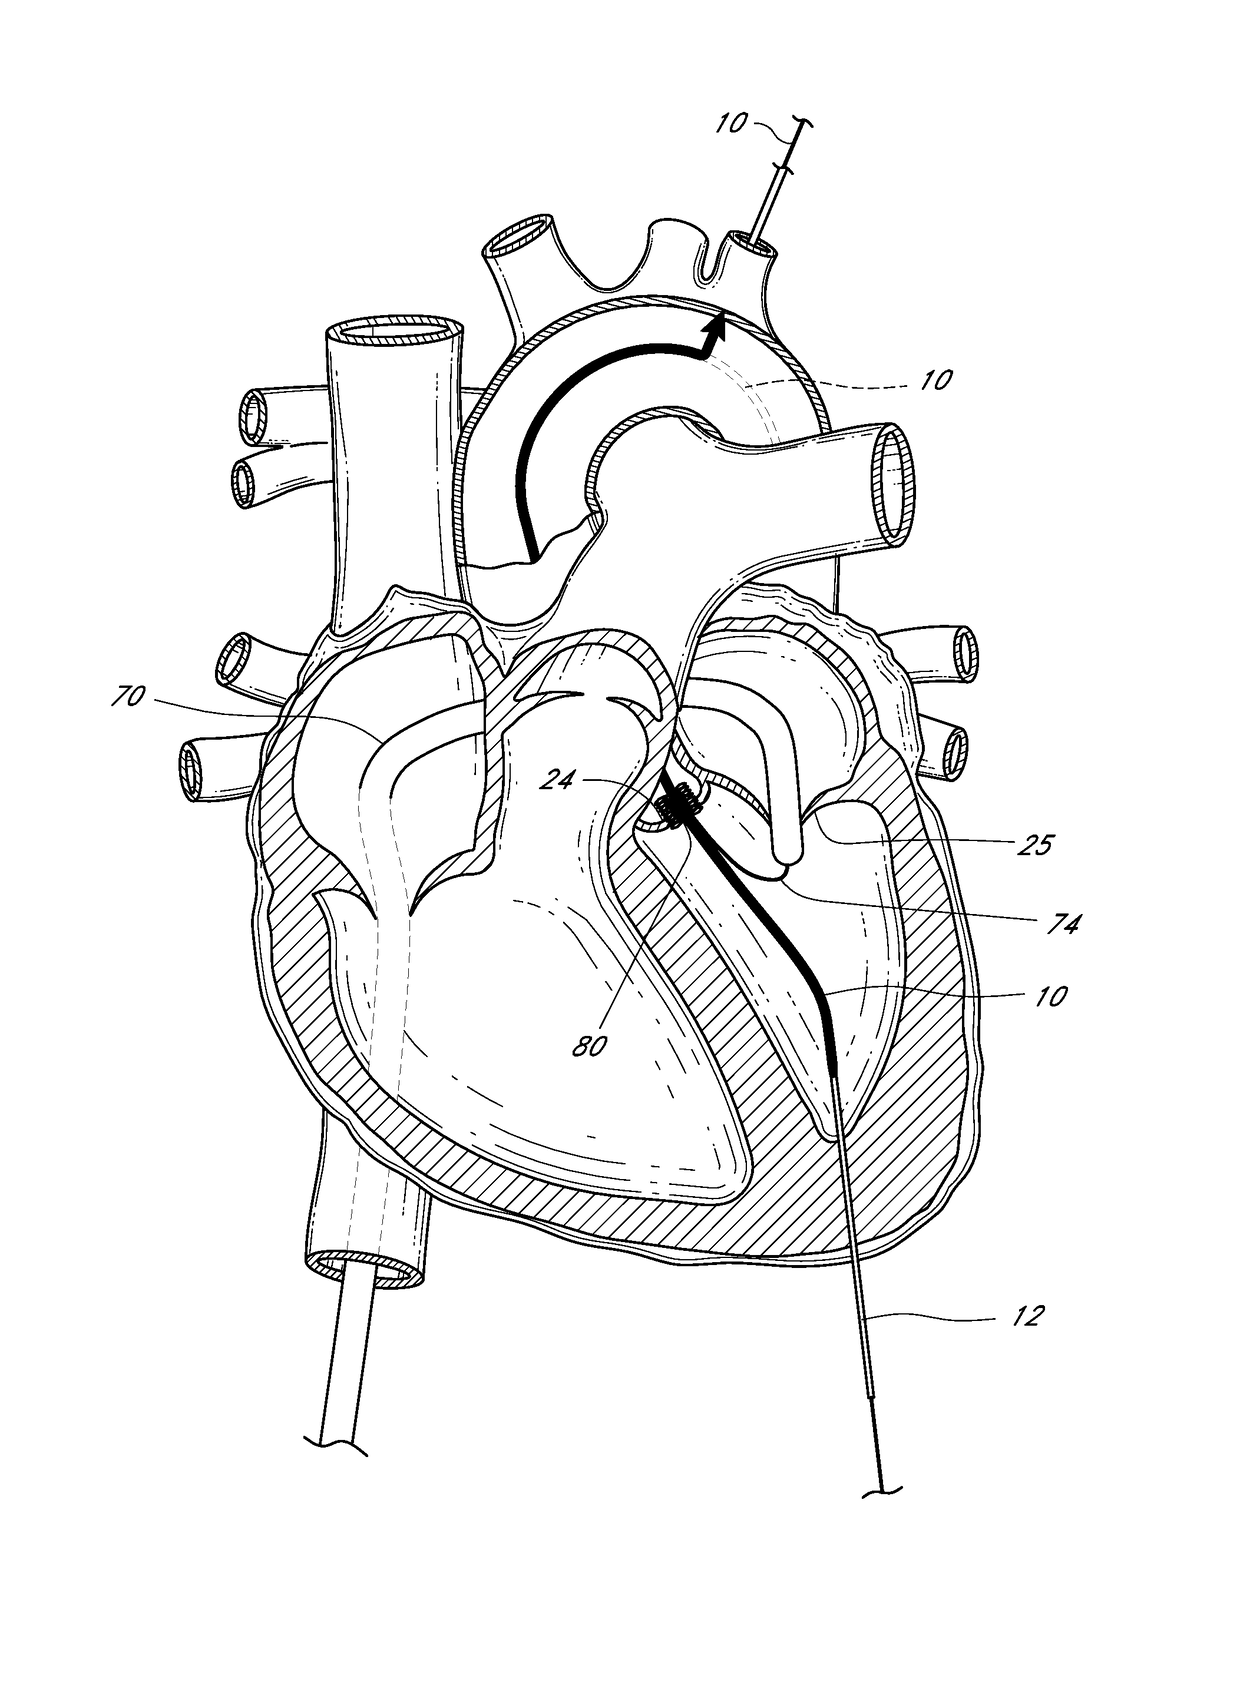 Cardiovascular access and device delivery system